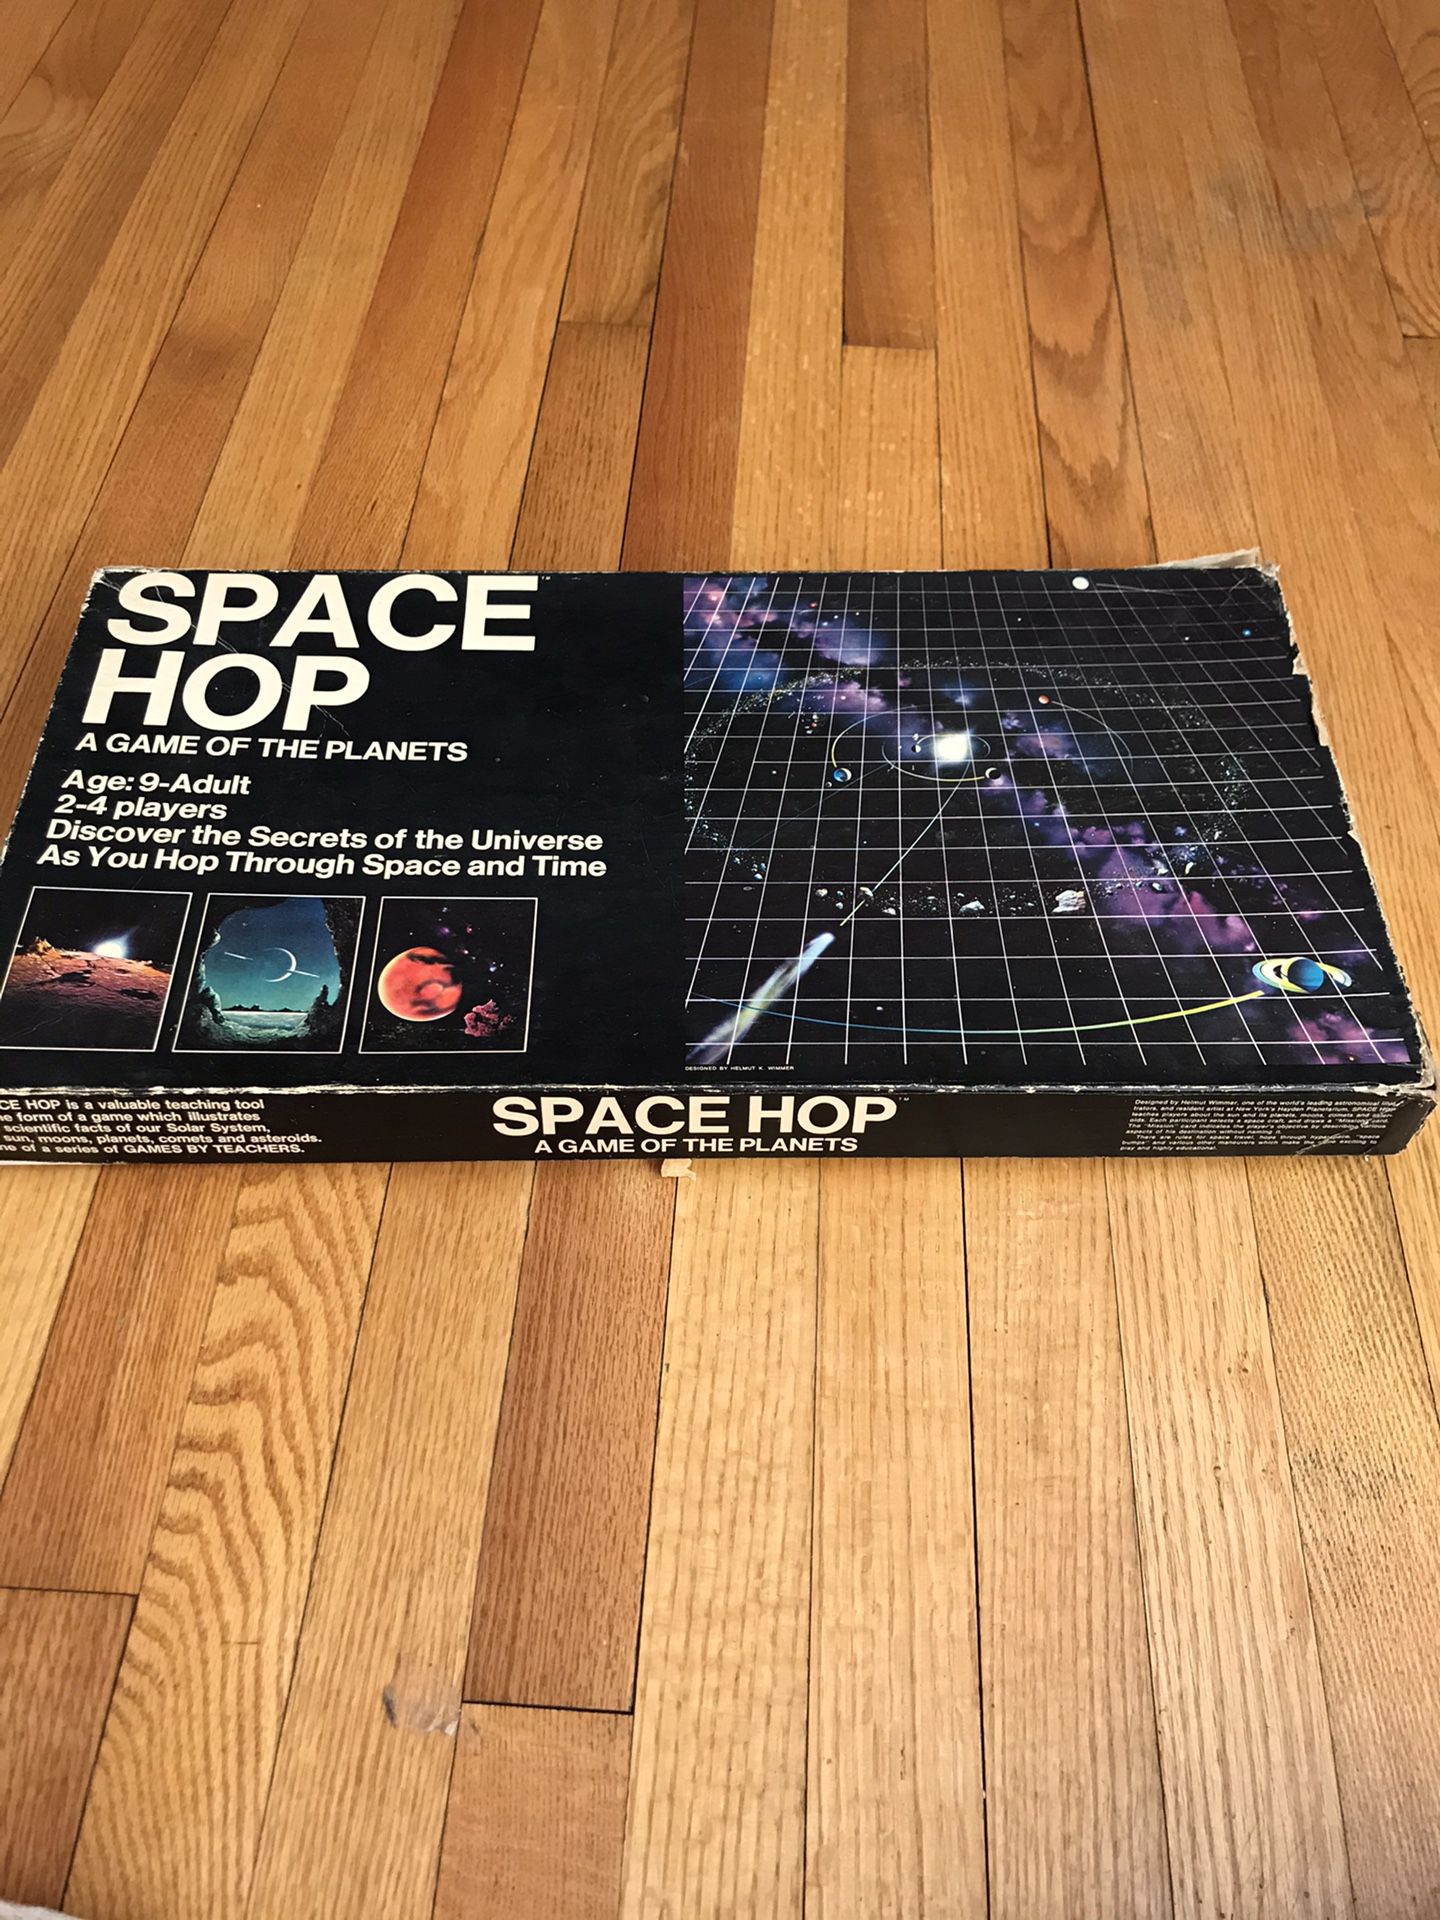 Vintage 1981 Space Hop: A Game of Planets Board Game by Teaching Concepts INC Used.  Pictures are accurate.